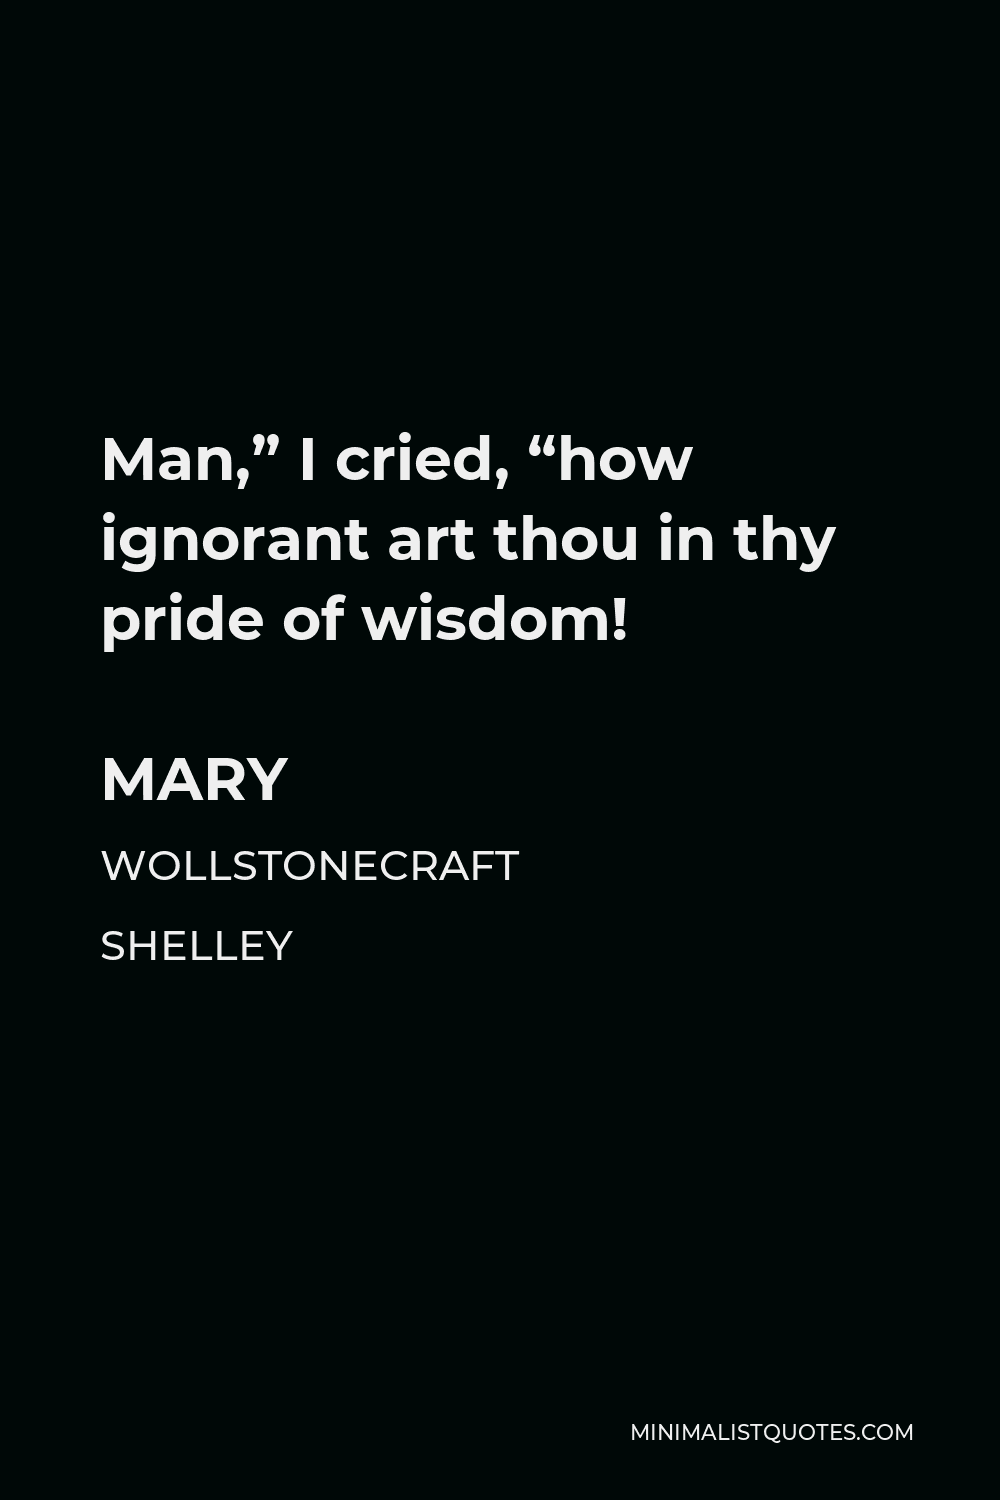 Mary Wollstonecraft Shelley Quote - Man,” I cried, “how ignorant art thou in thy pride of wisdom!